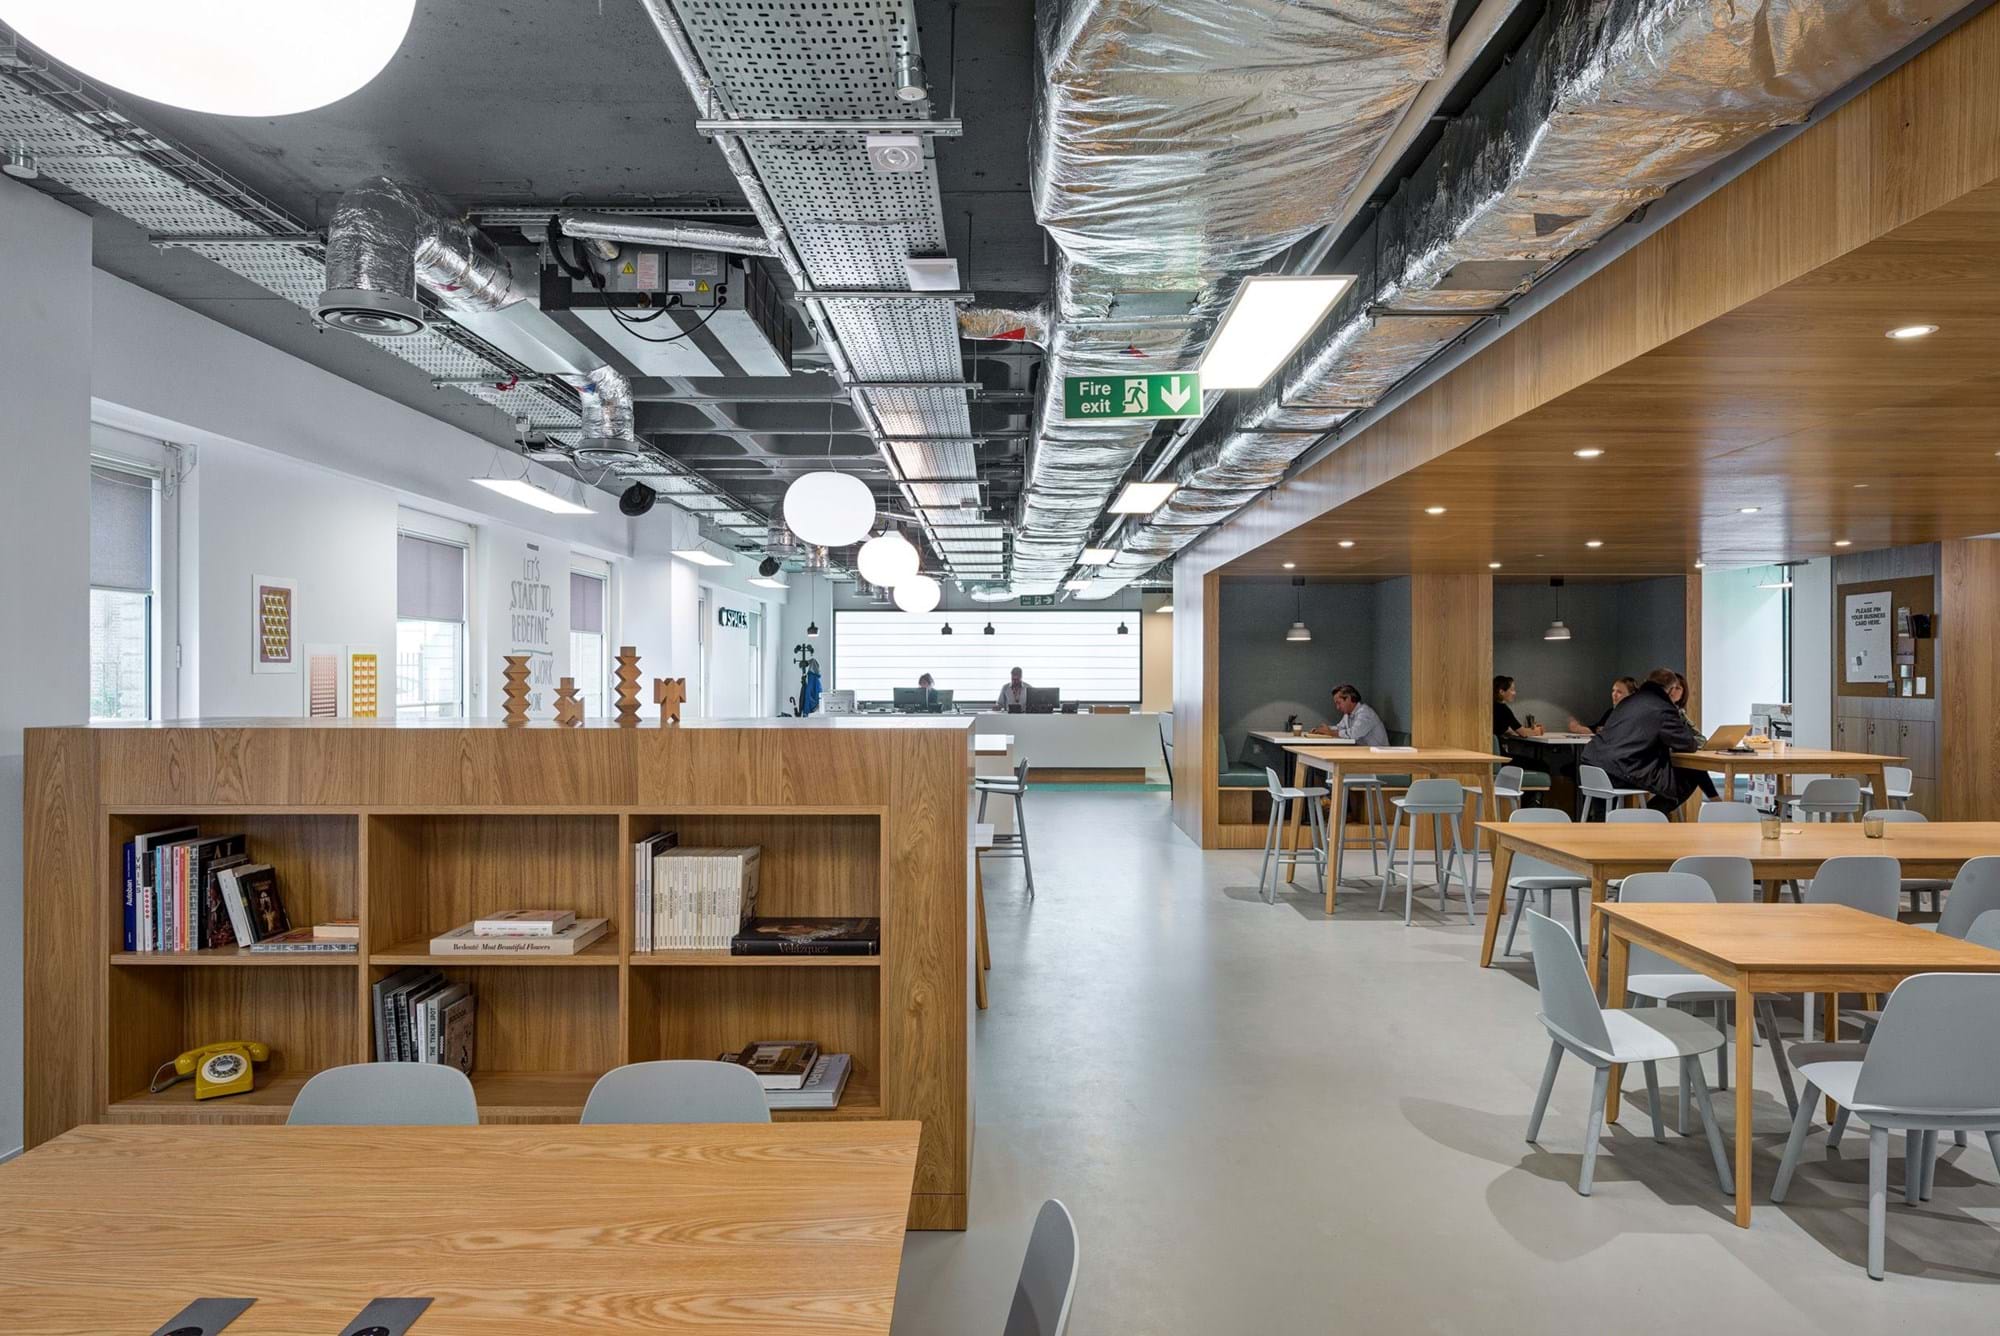 Modus Workspace office design, fit out and refurbishment - Spaces - Brighton - Spaces Brighton 15 highres sRGB.jpg